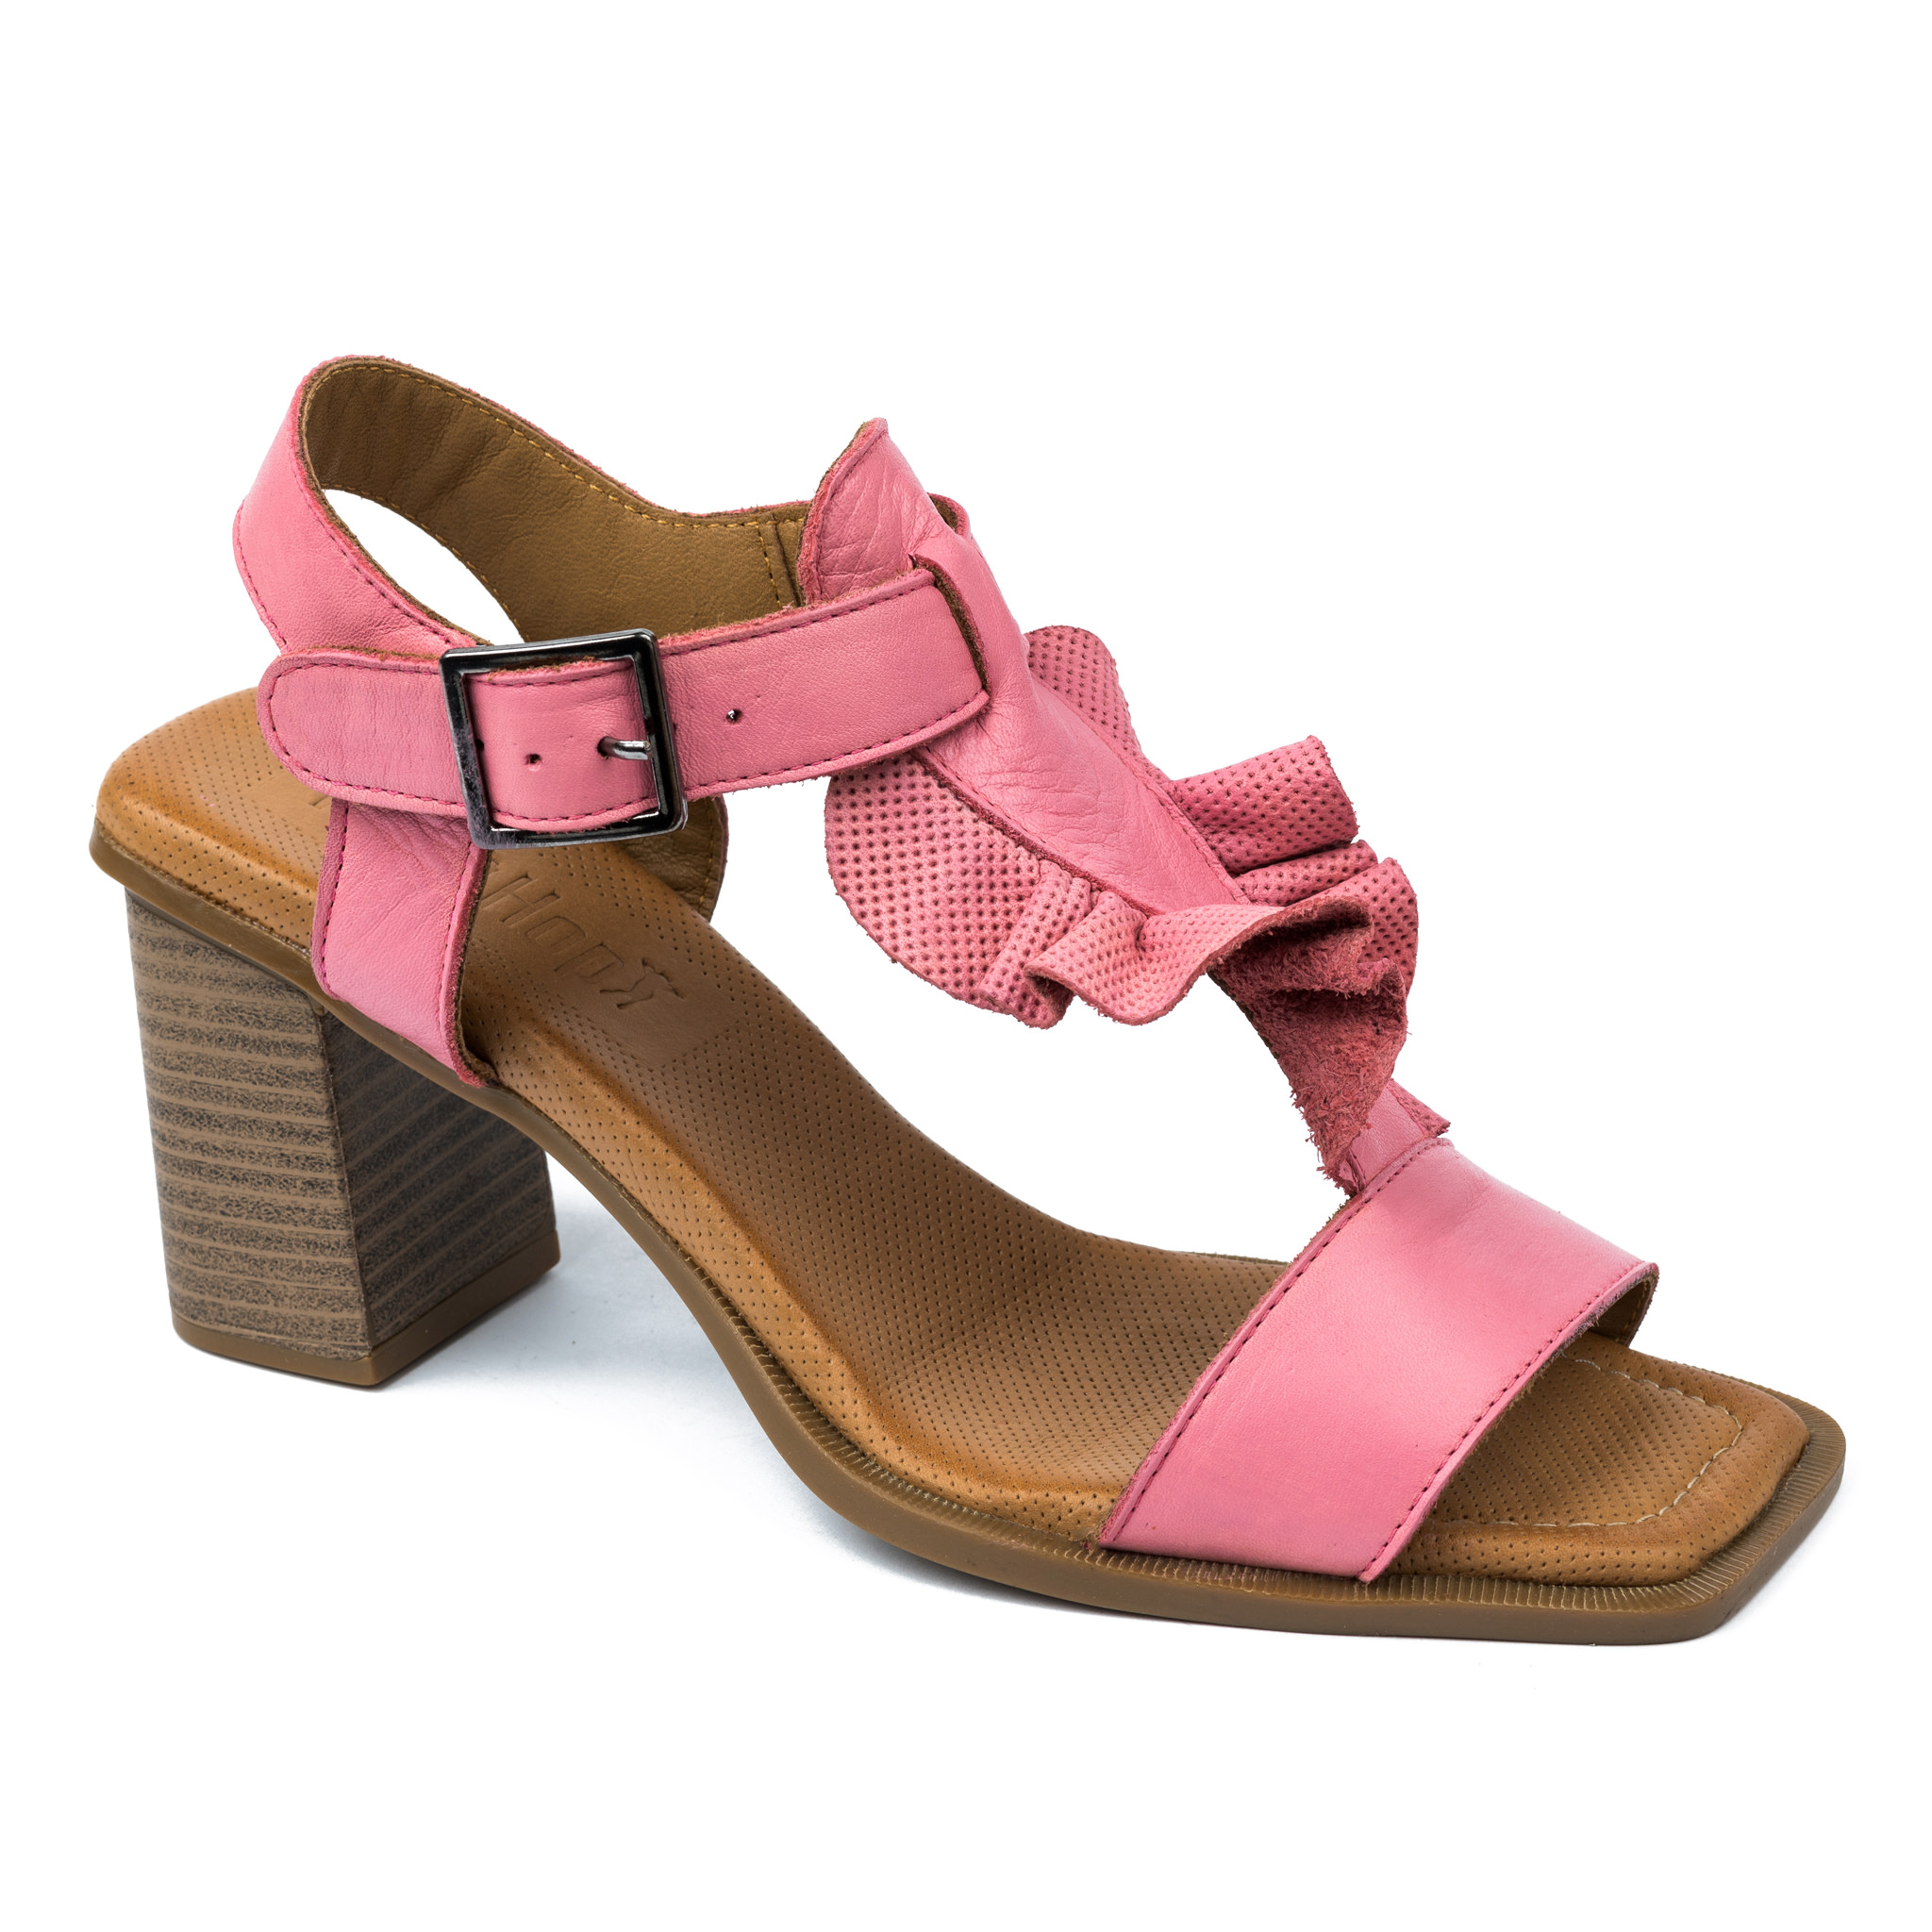 Leather sandals A713 - ROSE